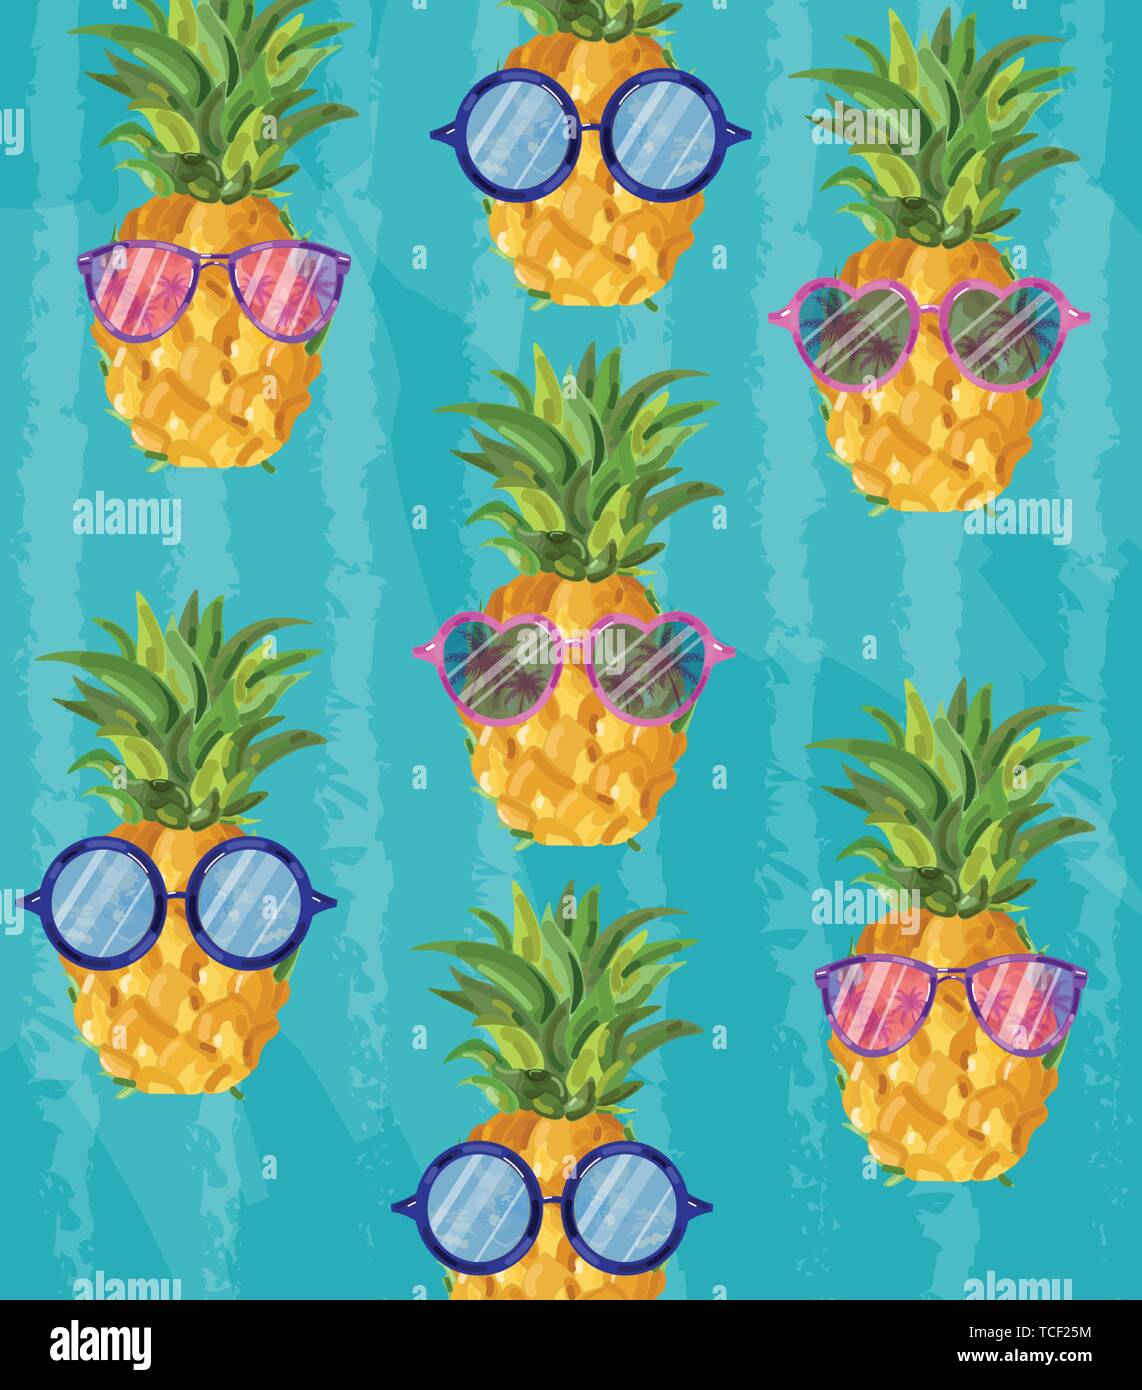 Summer cute pineapple pattern vector cartoon style funny fruits with glasses tropic poster stock vector image art